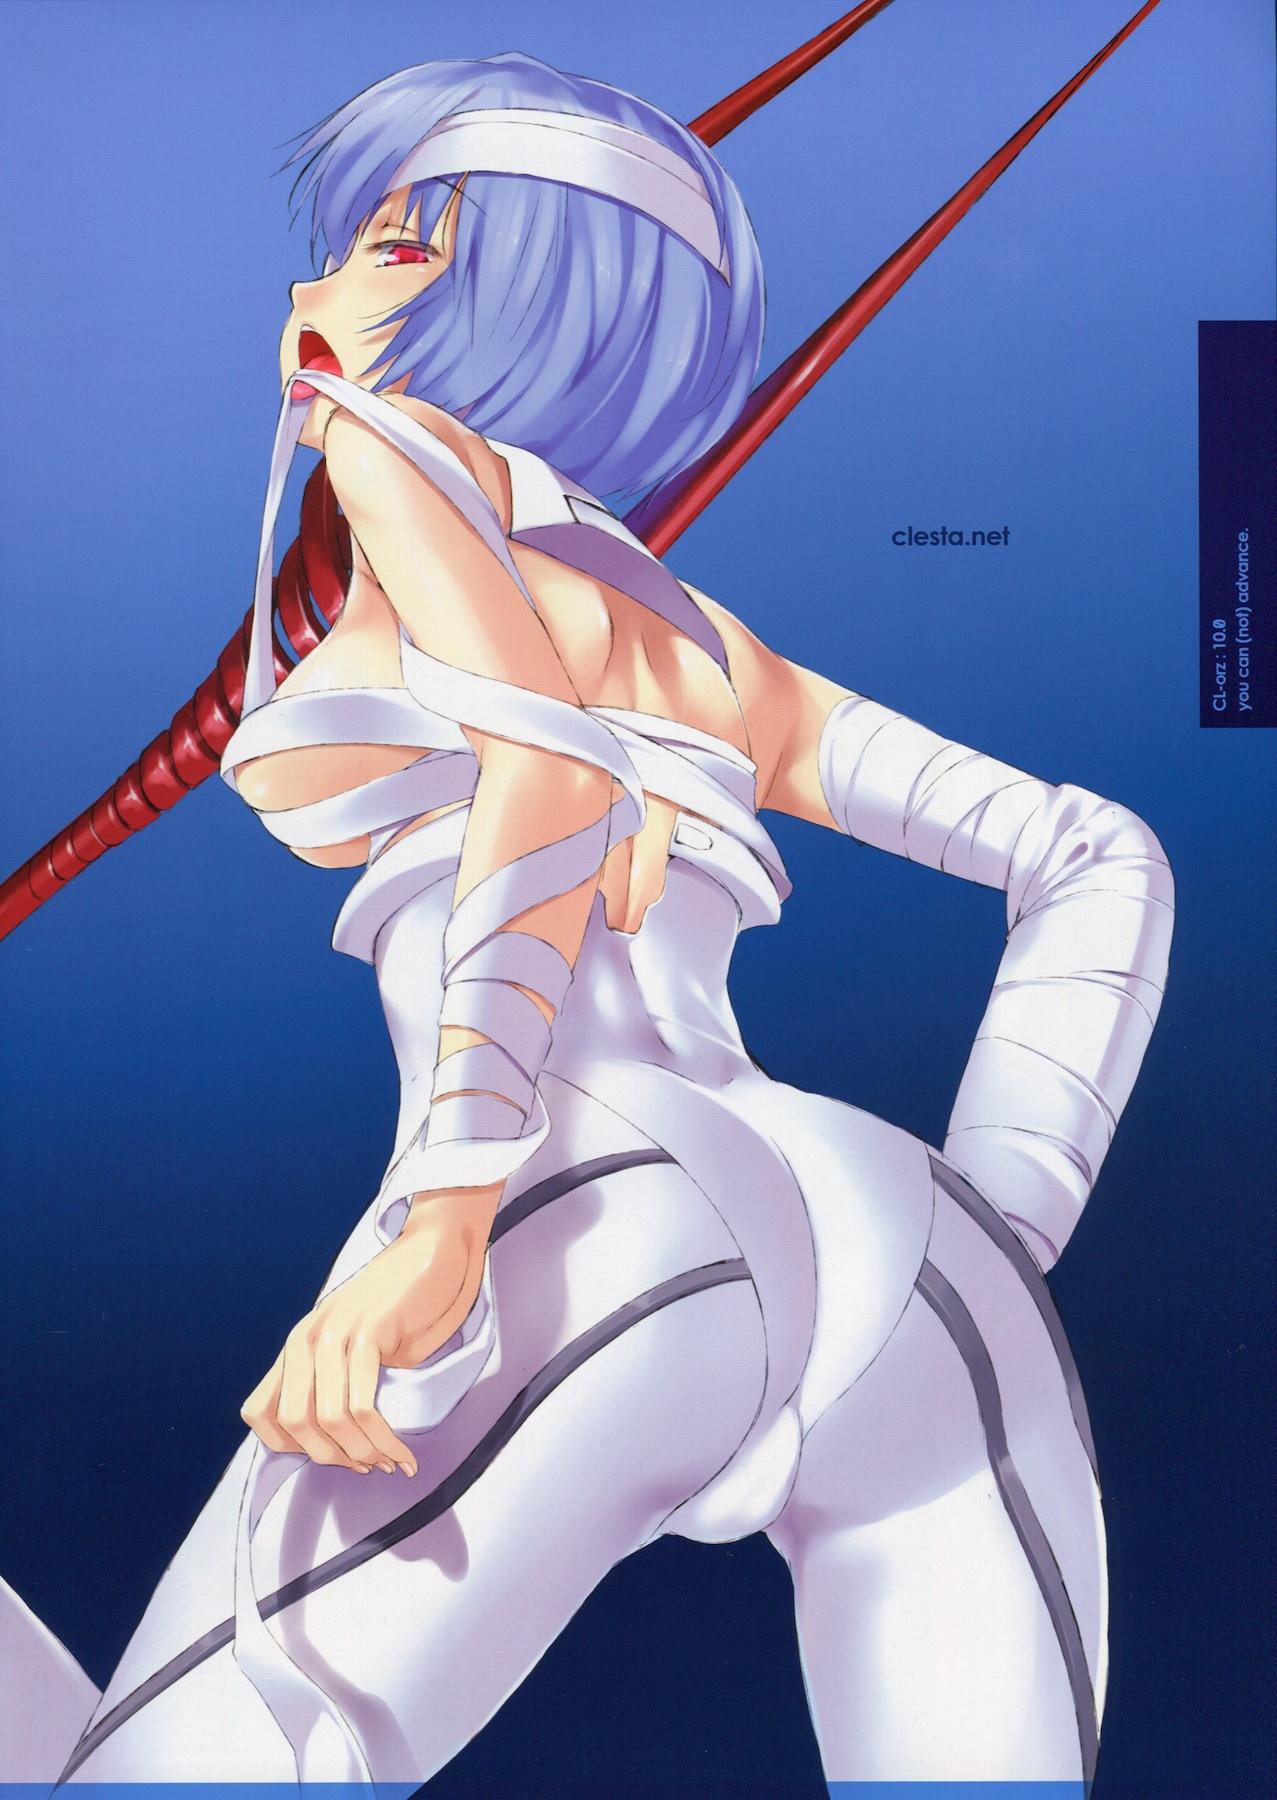 (SC48) [Clesta (Cle Masahiro)] CL-orz: 10.0 - you can (not) advance (Rebuild of Evangelion) 15